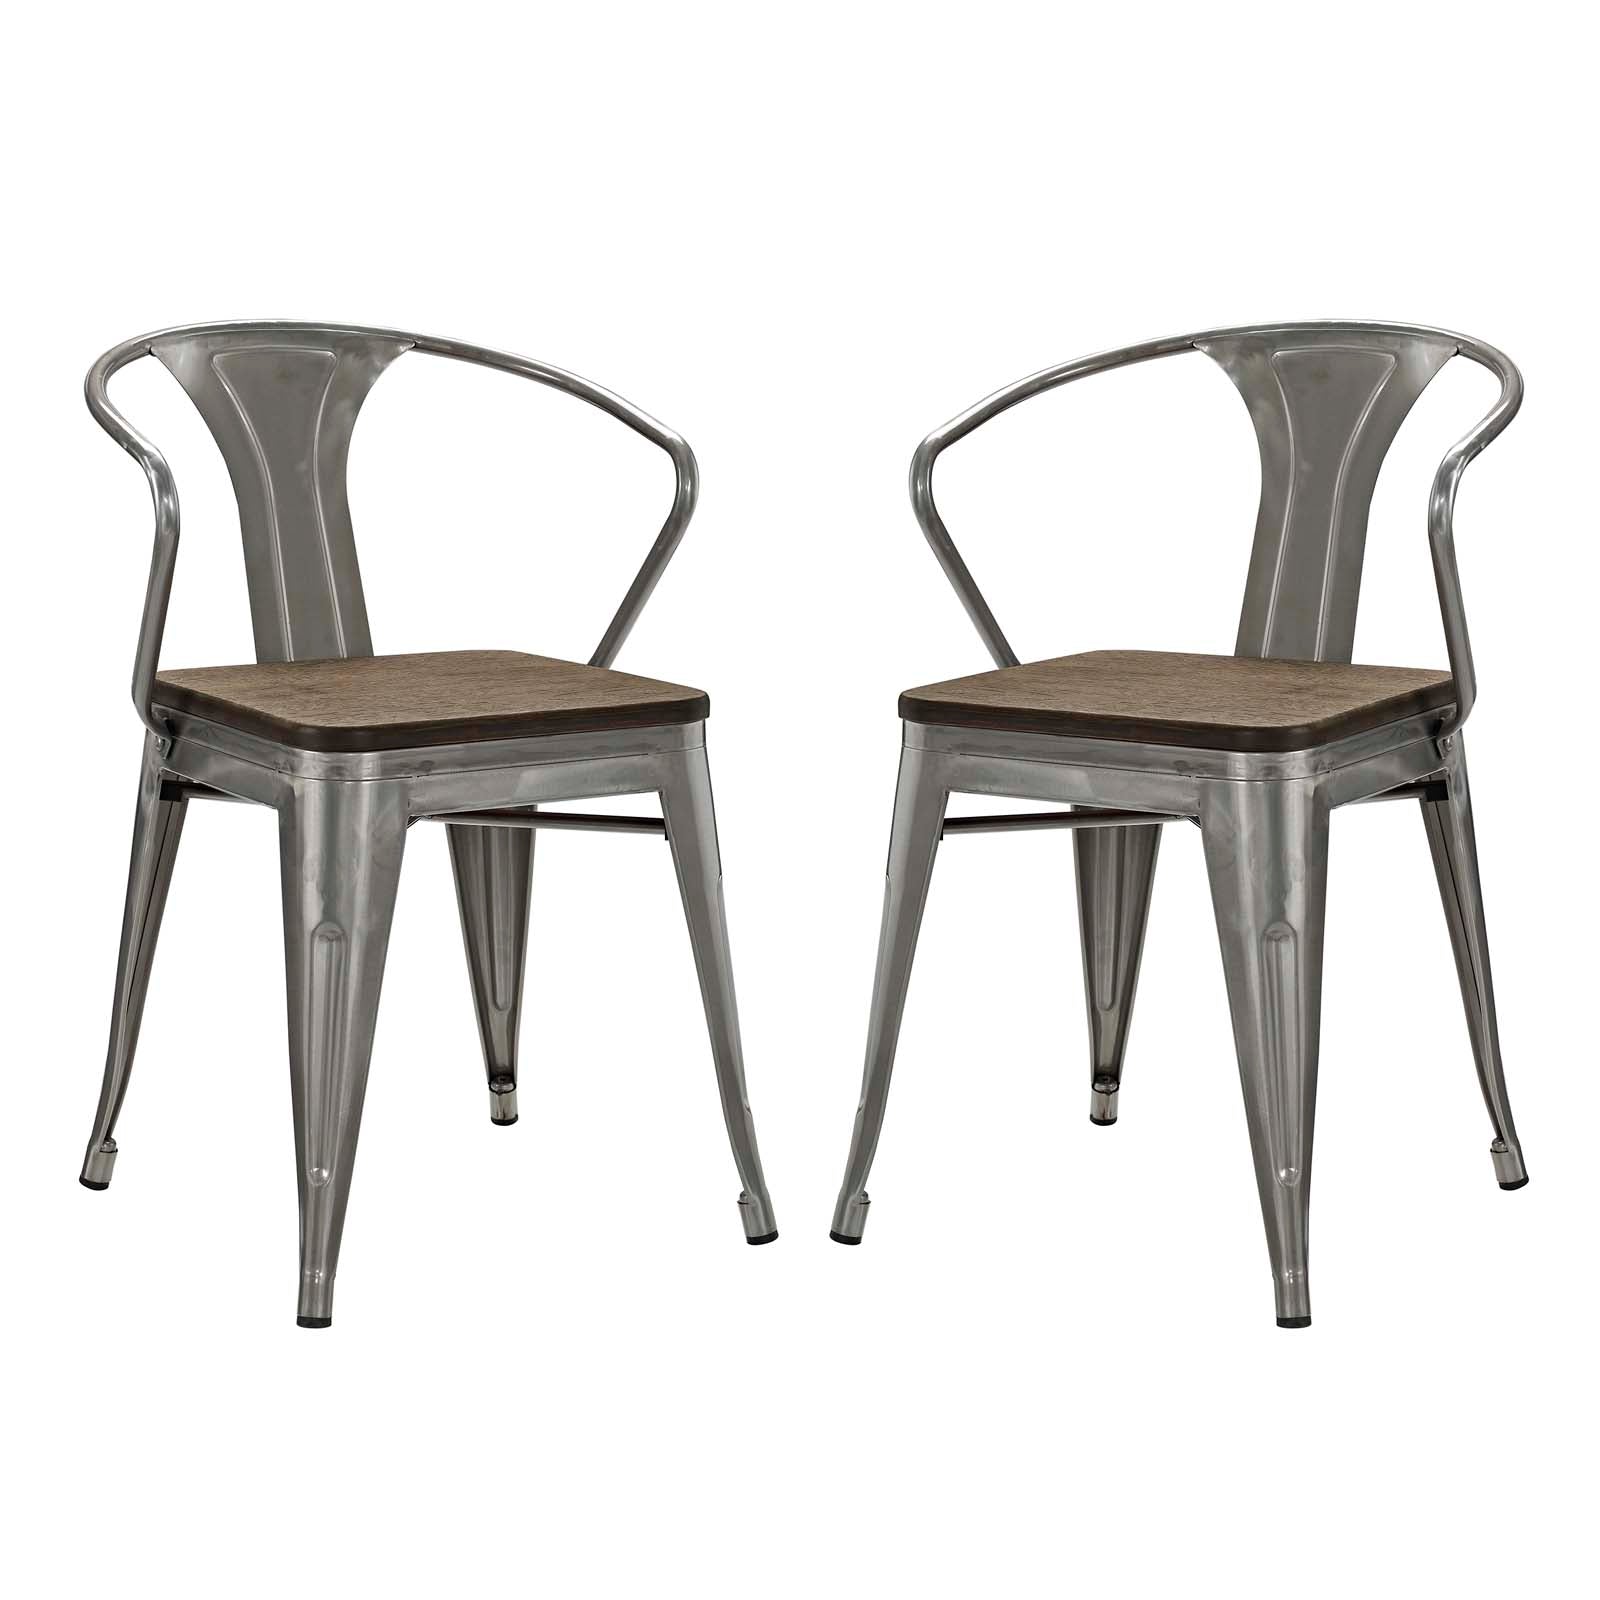 Promenade Bamboo Dining Chair Set of 2 - East Shore Modern Home Furnishings